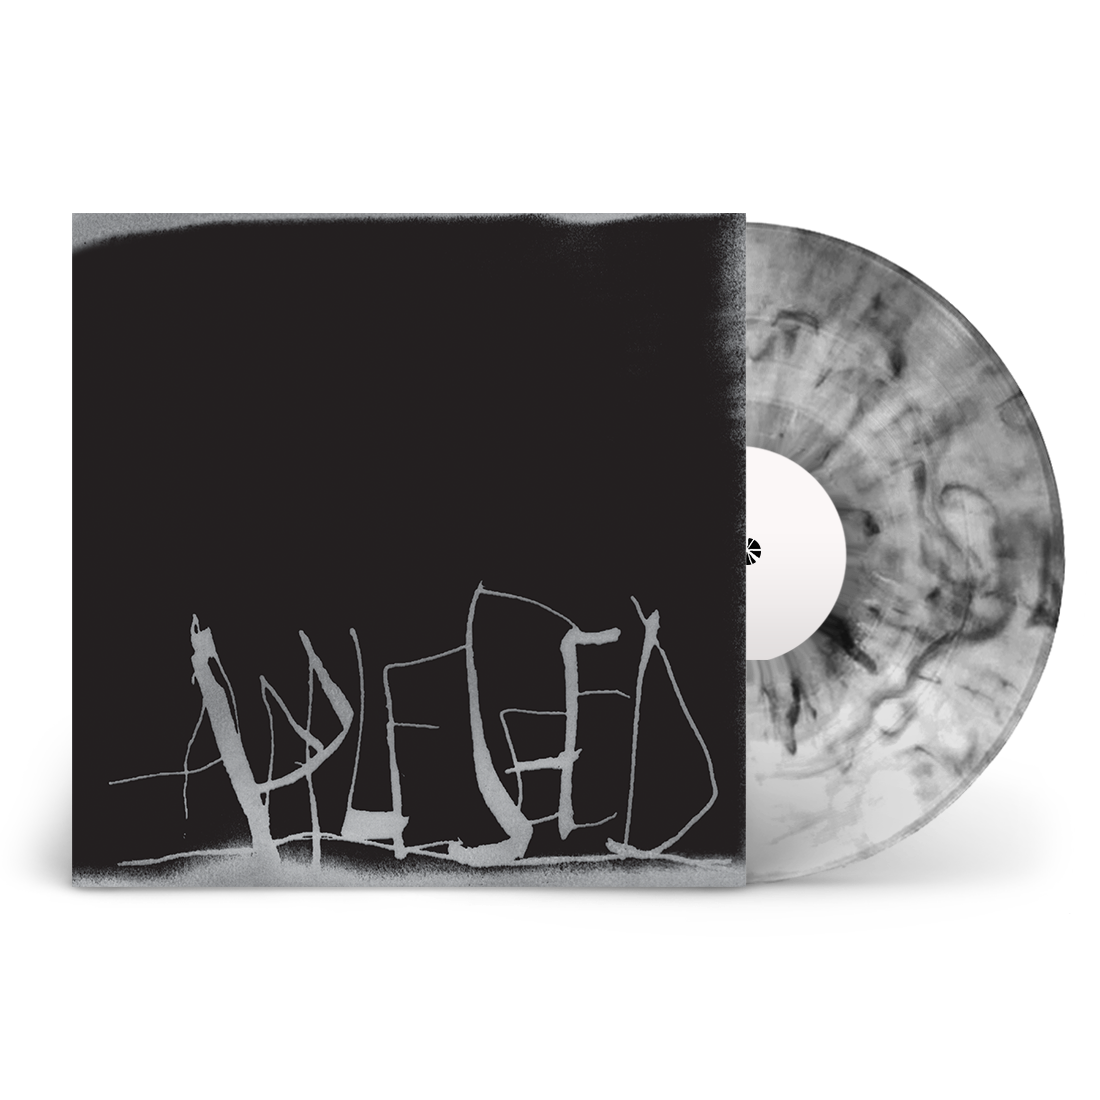 Appleseed: Limited Edition Translucent Clear + Black Smoke Vinyl LP